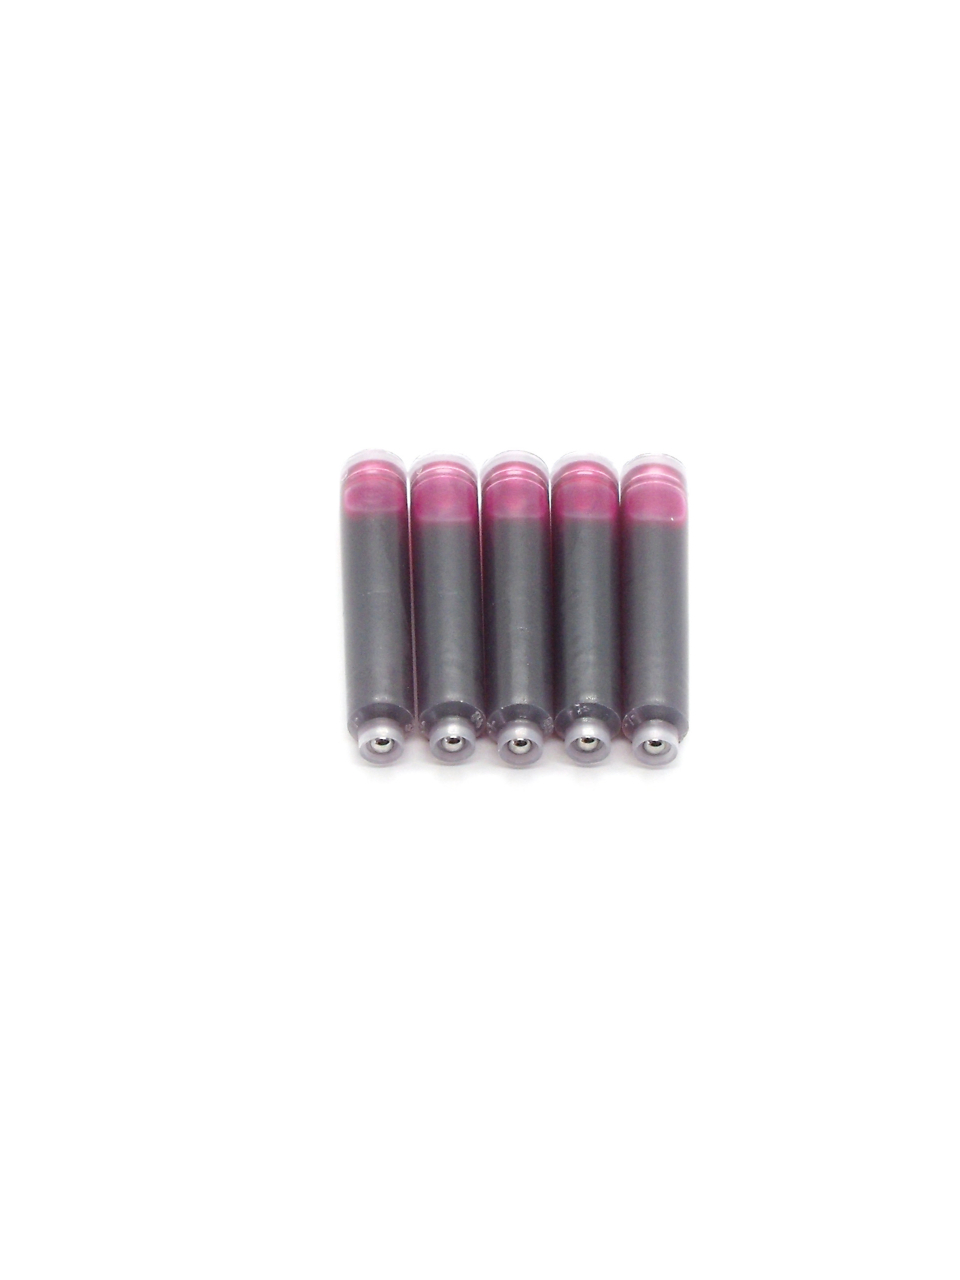 Top Ink Cartridges For David Oscarson Fountain Pens (Pink)